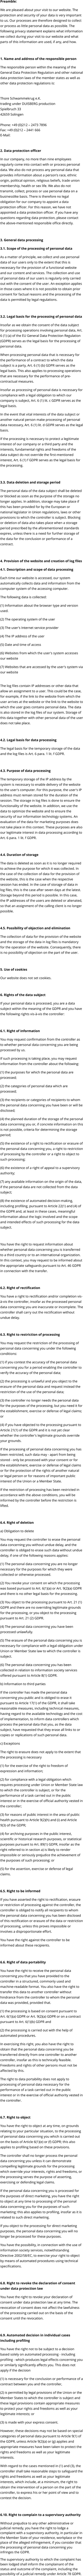 Preamble: We are pleased about your visit to our website. The protection and security of your data is very important to us. Our processes are therefore designed to collect or process as little personal data as possible. The following privacy statement explains what information we collect during your visit to our website and what parts of this information are used, if any, and how.  1. Name and address of the responsible person The responsible person within the meaning of the General Data Protection Regulation and other national data protection laws of the member states as well as other data protection regulations is:  Thore Schwammekrug e.K. trading under DUISBERG production Spielbruch 33 42659 Solingen  Phone: +49 (0)212 – 2473 7896 Fax: +49 (0)212 – 2441 666 E-Mail:  2. Data protection officer In our company, no more than nine employees regularly come into contact with or process personal data. We also do not process any personal data that provides information about a person's race, ethnic origin, political opinion, religious beliefs, trade union membership, health or sex life. We also do not transmit, collect, process or use personal data on a businesslike basis. There is therefore no legal obligation for our company to appoint a data protection officer. For this reason, we have not appointed a data protection officer. If you have any questions regarding data protection, please contact the above-mentioned responsible office directly.   3. General data processing 3.1. Scope of the processing of personal data As a matter of principle, we collect and use personal data of our users only to the extent that this is necessary for the provision of a functional website and our content and services. The collection and use of personal data of our users is regularly only carried out with the consent of the user. An exception applies in those cases where it is not possible to obtain prior consent for factual reasons and the processing of the data is permitted by legal regulations.   3.2. Legal basis for the processing of personal data Insofar as we obtain the consent of the data subject for processing operations involving personal data, Art. 6 (1) (a) of the EU General Data Protection Regulation (GDPR) serves as the legal basis for the processing of personal data. When processing personal data that is necessary for the performance of a contract to which the data subject is a party, Art. 6 (1) (b) GDPR serves as the legal basis. This also applies to processing operations that are necessary for the performance of pre-contractual measures. Insofar as processing of personal data is necessary for compliance with a legal obligation to which our company is subject, Art. 6 (1) lit. c GDPR serves as the legal basis. In the event that vital interests of the data subject or another natural person make processing of personal data necessary, Art. 6 (1) lit. d GDPR serves as the legal basis. If the processing is necessary to protect a legitimate interest of our company or a third party and the interests, fundamental rights and freedoms of the data subject do not override the first-mentioned interest, Art. 6 (1) f GDPR serves as the legal basis for the processing.   3.3. Data deletion and storage period The personal data of the data subject shall be deleted or blocked as soon as the purpose of the storage no longer applies. In addition, storage may take place if this has been provided for by the European or national legislator in Union regulations, laws or other provisions to which the controller is subject. Blocking or deletion of data also takes place when a storage period prescribed by the aforementioned standards expires, unless there is a need for further storage of the data for the conclusion or performance of a contract.  4. Provision of the website and creation of log files 4.1. Description and scope of data processing Each time our website is accessed, our system automatically collects data and information from the computer system of the accessing computer.  The following data is collected: (1) Information about the browser type and version used. (2) The operating system of the user (3) The user's Internet service provider (4) The IP address of the user (5) Date and time of access (6) Websites from which the user's system accesses our website  (7) Websites that are accessed by the user's system via our website  The log files contain IP addresses or other data that allow an assignment to a user. This could be the case, for example, if the link to the website from which the user arrives at the website or the link to the website to which the user goes contains personal data. The data is also stored in the log files of our system. Storage of this data together with other personal data of the user does not take place.  4.2. Legal basis for data processing The legal basis for the temporary storage of the data and the log files is Art. 6 para. 1 lit. f GDPR.  4.3. Purpose of data processing The temporary storage of the IP address by the system is necessary to enable delivery of the website to the user's computer. For this purpose, the user's IP address must remain stored for the duration of the session. The storage in log files is done to ensure the functionality of the website. In addition, we use the data to optimize the website and to ensure the security of our information technology systems. An evaluation of the data for marketing purposes does not take place in this context. These purposes are also our legitimate interest in data processing according to Art. 6 para. 1 lit. f GDPR.  4.4. Duration of storage The data is deleted as soon as it is no longer required to achieve the purpose for which it was collected. In the case of the collection of data for the provision of the website, this is the case when the respective session has ended. In the case of storage of data in log files, this is the case after seven days at the latest. Storage beyond this period is possible. In this case, the IP addresses of the users are deleted or alienated, so that an assignment of the calling client is no longer possible.  4.5. Possibility of objection and elimination The collection of data for the provision of the website and the storage of the data in log files is mandatory for the operation of the website. Consequently, there is no possibility of objection on the part of the user.  5. Use of cookies Our website does not set cookies.  6. Rights of the data subject If your personal data is processed, you are a data subject within the meaning of the GDPR and you have the following rights vis-à-vis the controller:  6.1. Right of information You may request confirmation from the controller as to whether personal data concerning you are being processed by us.  If such processing is taking place, you may request information from the controller about the following: (1) the purposes for which the personal data are processed; (2) the categories of personal data which are processed; (3) the recipients or categories of recipients to whom the personal data concerning you have been or will be disclosed; (4) the planned duration of the storage of the personal data concerning you or, if concrete information on this is not possible, criteria for determining the storage period; (5) the existence of a right to rectification or erasure of the personal data concerning you, a right to restriction of processing by the controller or a right to object to such processing;  (6) the existence of a right of appeal to a supervisory authority; (7) any available information on the origin of the data, if the personal data are not collected from the data subject; (8) the existence of automated decision-making, including profiling, pursuant to Article 22(1) and (4) of the GDPR and, at least in these cases, meaningful information about the logic involved and the scope and intended effects of such processing for the data subject.  You have the right to request information about whether personal data concerning you is transferred to a third country or to an international organization. In this context, you may request to be informed about the appropriate safeguards pursuant to Art. 46 GDPR in connection with the transfer.  6.2. Right of rectification You have a right to rectification and/or completion vis-à-vis the controller, insofar as the processed personal data concerning you are inaccurate or incomplete. The controller shall carry out the rectification without undue delay.  6.3. Right to restriction of processing You may request the restriction of the processing of personal data concerning you under the following conditions: (1) if you contest the accuracy of the personal data concerning you for a period enabling the controller to verify the accuracy of the personal data; (2) the processing is unlawful and you object to the erasure of the personal data and request instead the restriction of the use of the personal data; (3) the controller no longer needs the personal data for the purposes of the processing, but you need it for the establishment, exercise or defense of legal claims; or (4) if you have objected to the processing pursuant to Article 21(1) of the GDPR and it is not yet clear whether the controller's legitimate grounds override your grounds. If the processing of personal data concerning you has been restricted, such data may - apart from being stored - only be processed with your consent or for the establishment, exercise or defense of legal claims or for the protection of the rights of another natural or legal person or for reasons of important public interest of the Union or a Member State. If the restriction of processing has been restricted in accordance with the above conditions, you will be informed by the controller before the restriction is lifted.  6.4. Right of deletion a) Obligation to delete You may request the controller to erase the personal data concerning you without undue delay, and the controller is obliged to erase such data without undue delay, if one of the following reasons applies: (1) The personal data concerning you are no longer necessary for the purposes for which they were collected or otherwise processed. (2) You revoke your consent on which the processing was based pursuant to Art. 6(1)(a) or Art. 9(2)(a) GDPR and there is no other legal basis for the processing.  (3) You object to the processing pursuant to Art. 21 (1) GDPR and there are no overriding legitimate grounds for the processing, or you object to the processing pursuant to Art. 21 (2) GDPR.  (4) The personal data concerning you have been processed unlawfully.  (5) The erasure of the personal data concerning you is necessary for compliance with a legal obligation under Union or Member State law to which the controller is subject.  (6) The personal data concerning you has been collected in relation to information society services offered pursuant to Article 8(1) GDPR. b) Information to third parties If the controller has made the personal data concerning you public and is obliged to erase it pursuant to Article 17(1) of the GDPR, it shall take reasonable measures, including technical measures, having regard to the available technology and the cost of implementation, to inform data controllers which process the personal data that you, as the data subject, have requested that they erase all links to or copies or replications of such personal data.  c) Exceptions The right to erasure does not apply to the extent that the processing is necessary (1) for the exercise of the right to freedom of expression and information; (2) for compliance with a legal obligation which requires processing under Union or Member State law to which the controller is subject, or for the performance of a task carried out in the public interest or in the exercise of official authority vested in the controller; (3) for reasons of public interest in the area of public health pursuant to Article 9(2)(h) and (i) and Article 9(3) of the GDPR; (4) for archiving purposes in the public interest, scientific or historical research purposes, or statistical purposes pursuant to Art. 89(1) GDPR, insofar as the right referred to in section a) is likely to render impossible or seriously prejudice the achievement of the purposes of such processing; or (5) for the assertion, exercise or defense of legal claims.  6.5. Right to be informed If you have asserted the right to rectification, erasure or restriction of processing against the controller, the controller is obliged to notify all recipients to whom the personal data concerning you has been disclosed of this rectification or erasure of the data or restriction of processing, unless this proves impossible or involves a disproportionate effort. You have the right against the controller to be informed about these recipients.  6.6. Right of data portability You have the right to receive the personal data concerning you that you have provided to the controller in a structured, commonly used and machine-readable format. You also have the right to transfer this data to another controller without hindrance from the controller to whom the personal data was provided, provided that. (1) the processing is based on consent pursuant to Art. 6(1)(a) GDPR or Art. 9(2)(a) GDPR or on a contract pursuant to Art. 6(1)(b) GDPR and (2) the processing is carried out with the help of automated procedures. In exercising this right, you also have the right to obtain that the personal data concerning you be transferred directly from one controller to another controller, insofar as this is technically feasible. Freedoms and rights of other persons must not be affected by this. The right to data portability does not apply to processing of personal data necessary for the performance of a task carried out in the public interest or in the exercise of official authority vested in the controller.  6.7. Right to object You have the right to object at any time, on grounds relating to your particular situation, to the processing of personal data concerning you which is carried out on the basis of Article 6(1)(e) or (f) GDPR; this also applies to profiling based on these provisions.  The controller shall no longer process the personal data concerning you unless it can demonstrate compelling legitimate grounds for the processing which override your interests, rights and freedoms, or the processing serves the purpose of asserting, exercising or defending legal claims. If the personal data concerning you is processed for the purposes of direct marketing, you have the right to object at any time to processing of the personal data concerning you for the purposes of such marketing; this also applies to profiling, insofar as it is related to such direct marketing. If you object to the processing for direct marketing purposes, the personal data concerning you will no longer be processed for these purposes. You have the possibility, in connection with the use of information society services, notwithstanding Directive 2002/58/EC, to exercise your right to object by means of automated procedures using technical specifications.  6.8. Right to revoke the declaration of consent under data protection law You have the right to revoke your declaration of consent under data protection law at any time. The revocation of consent does not affect the lawfulness of the processing carried out on the basis of the consent until the revocation.  6.9. Automated decision in individual cases including profiling You have the right not to be subject to a decision based solely on automated processing - including profiling - which produces legal effects concerning you or similarly significantly affects you. This does not apply if the decision  (1) is necessary for the conclusion or performance of a contract between you and the controller, (2) is permitted by legal provisions of the Union or the Member States to which the controller is subject and these legal provisions contain appropriate measures to protect your rights and freedoms as well as your legitimate interests; or (3) is made with your express consent. However, these decisions may not be based on special categories of personal data pursuant to Article 9(1) of the GDPR, unless Article 9(2)(a) or (g) applies and appropriate measures have been taken to protect the rights and freedoms as well as your legitimate interests. With regard to the cases mentioned in (1) and (3), the controller shall take reasonable steps to safeguard the rights and freedoms as well as your legitimate interests, which include, at a minimum, the right to obtain the intervention of a person on the part of the controller, to express his or her point of view and to contest the decision.  6.10. Right to complain to a supervisory authority Without prejudice to any other administrative or judicial remedy, you have the right to lodge a complaint with a supervisory authority, in particular in the Member State of your residence, workplace or the place of the alleged infringement, if you consider that the processing of personal data concerning you infringes the GDPR.  The supervisory authority to which the complaint has been lodged shall inform the complainant of the status and outcome of the complaint, including the possibility of a judicial remedy under Article 78 GDPR.